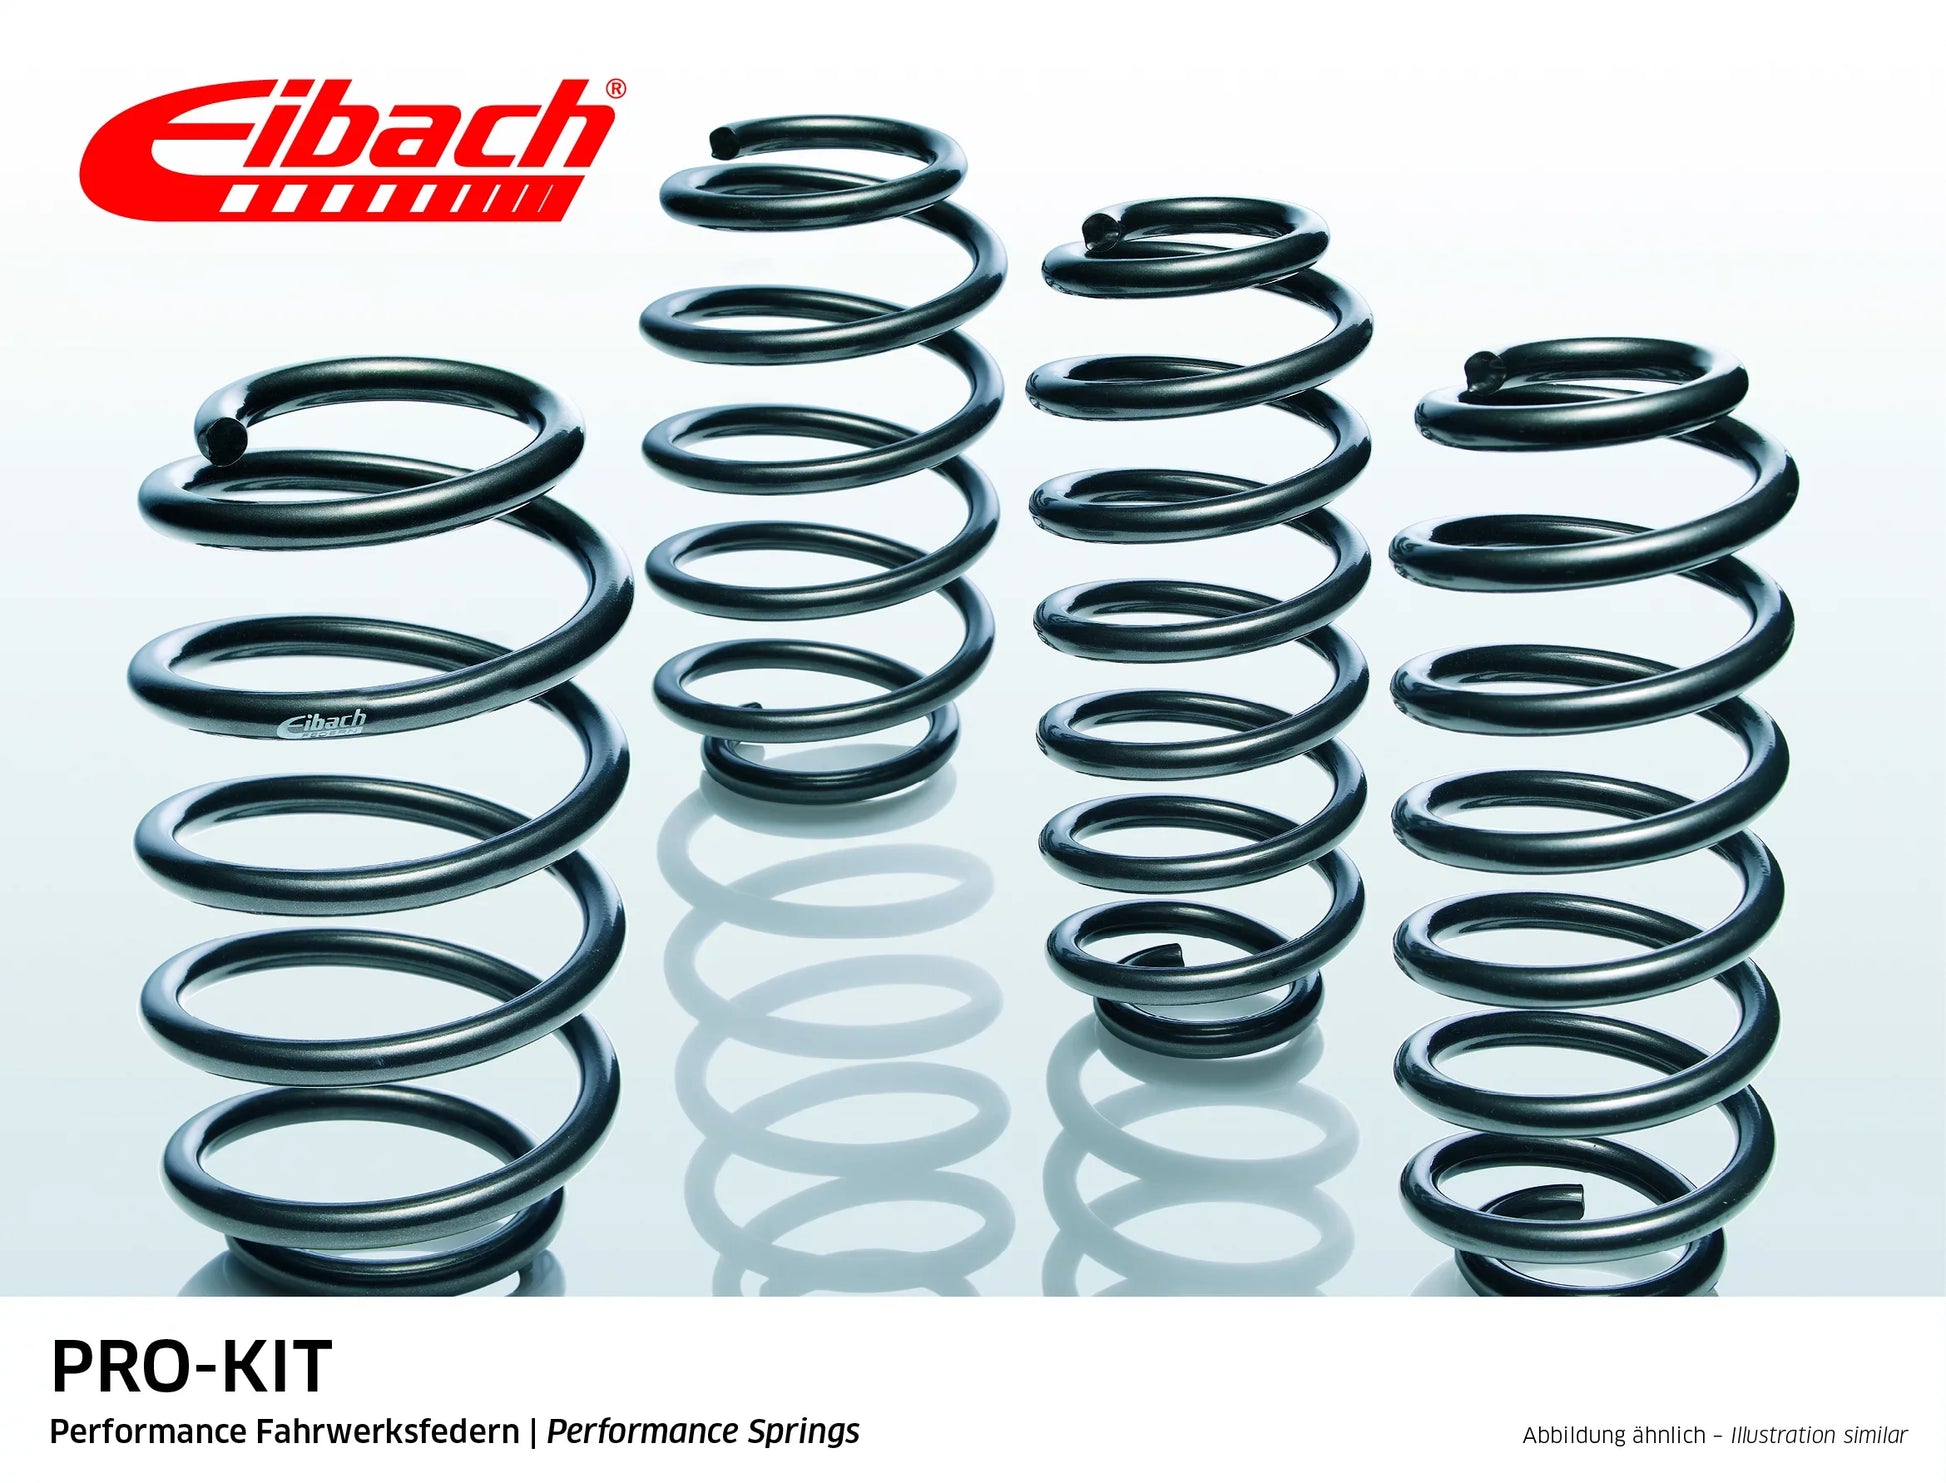 Eibach Pro-Kit Lowering Springs (E8501-140) at £185.78